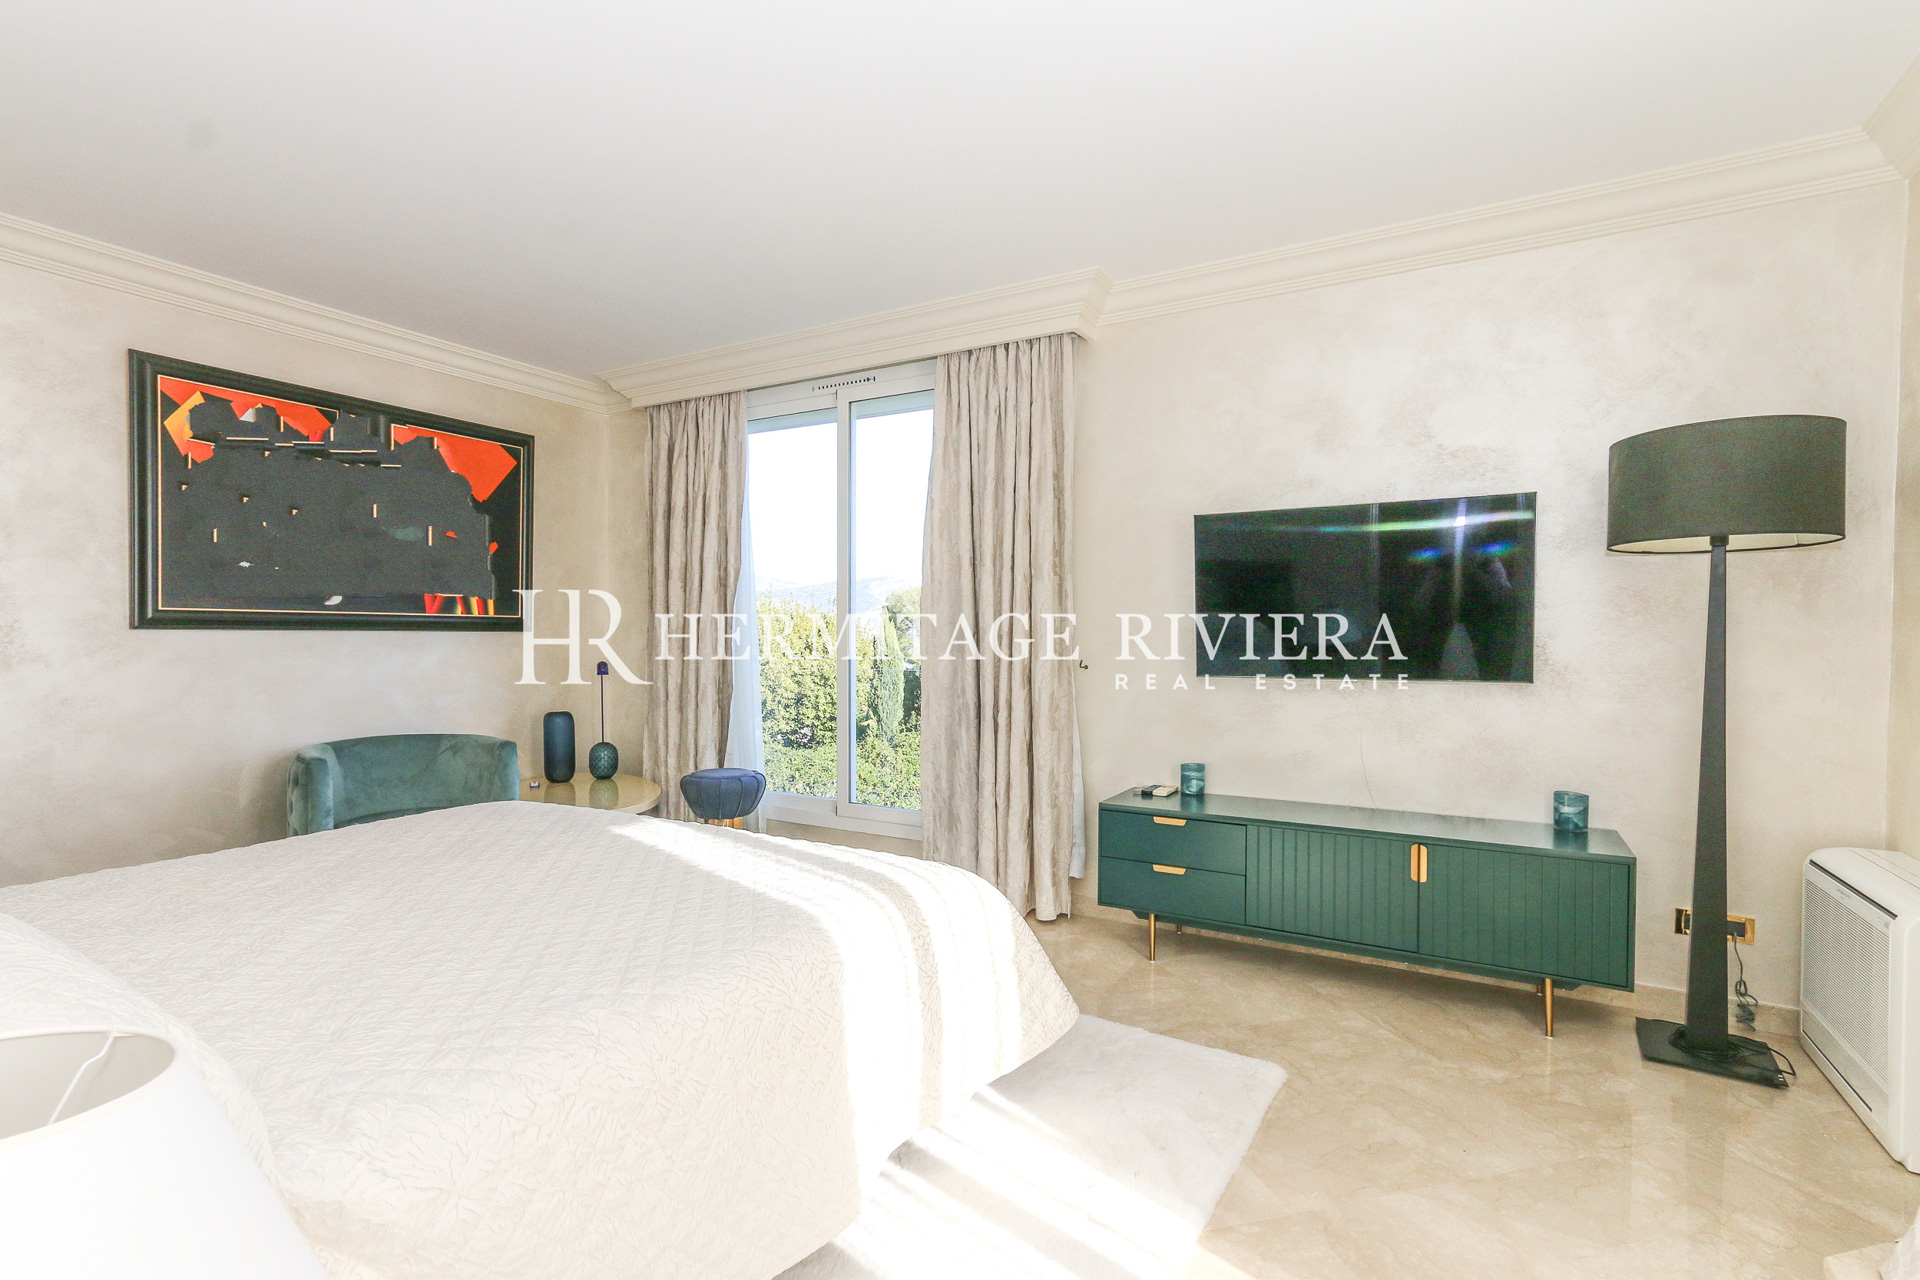 Superb villa close to the village with panoramic views (image 13)